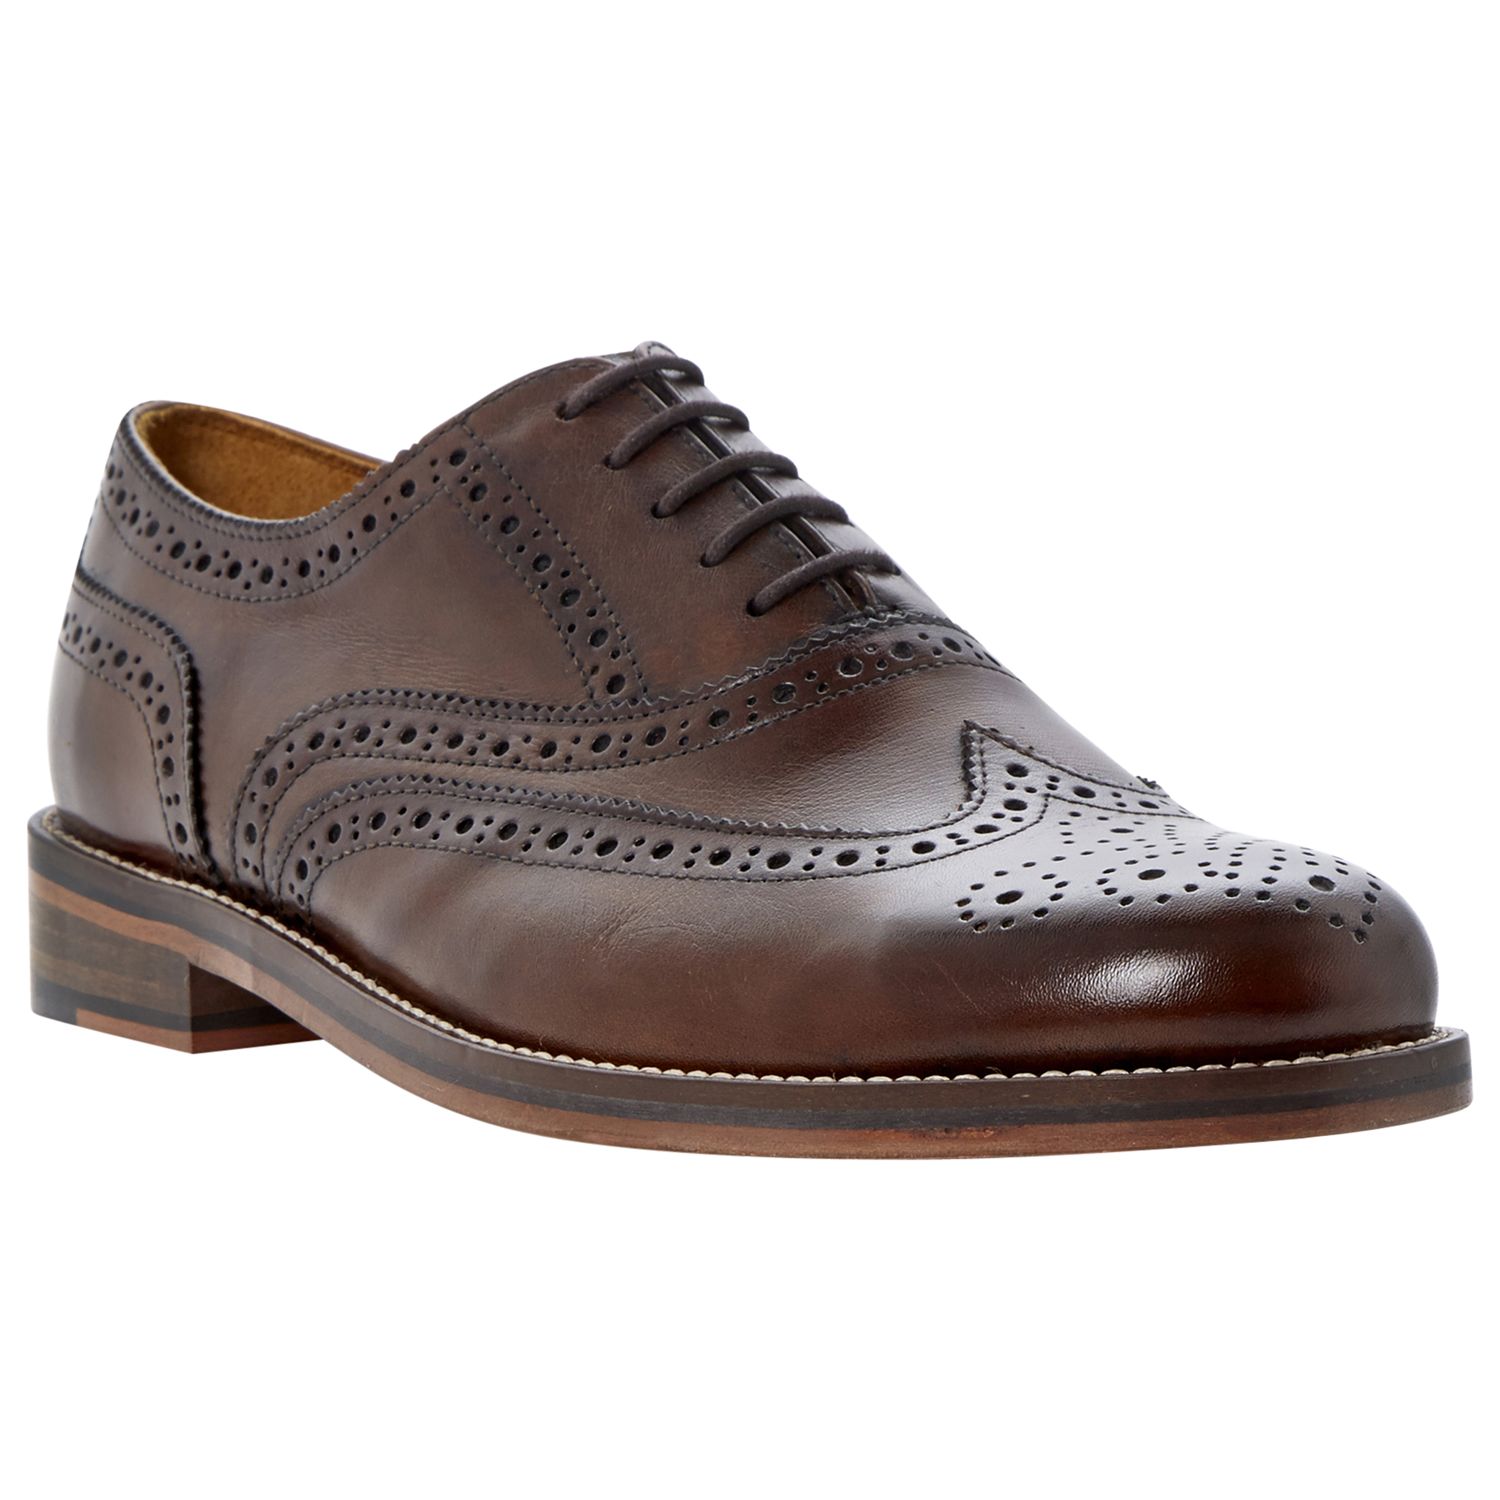 Bertie Braxton Leather Brogue Oxford Shoes, Brown at John Lewis & Partners